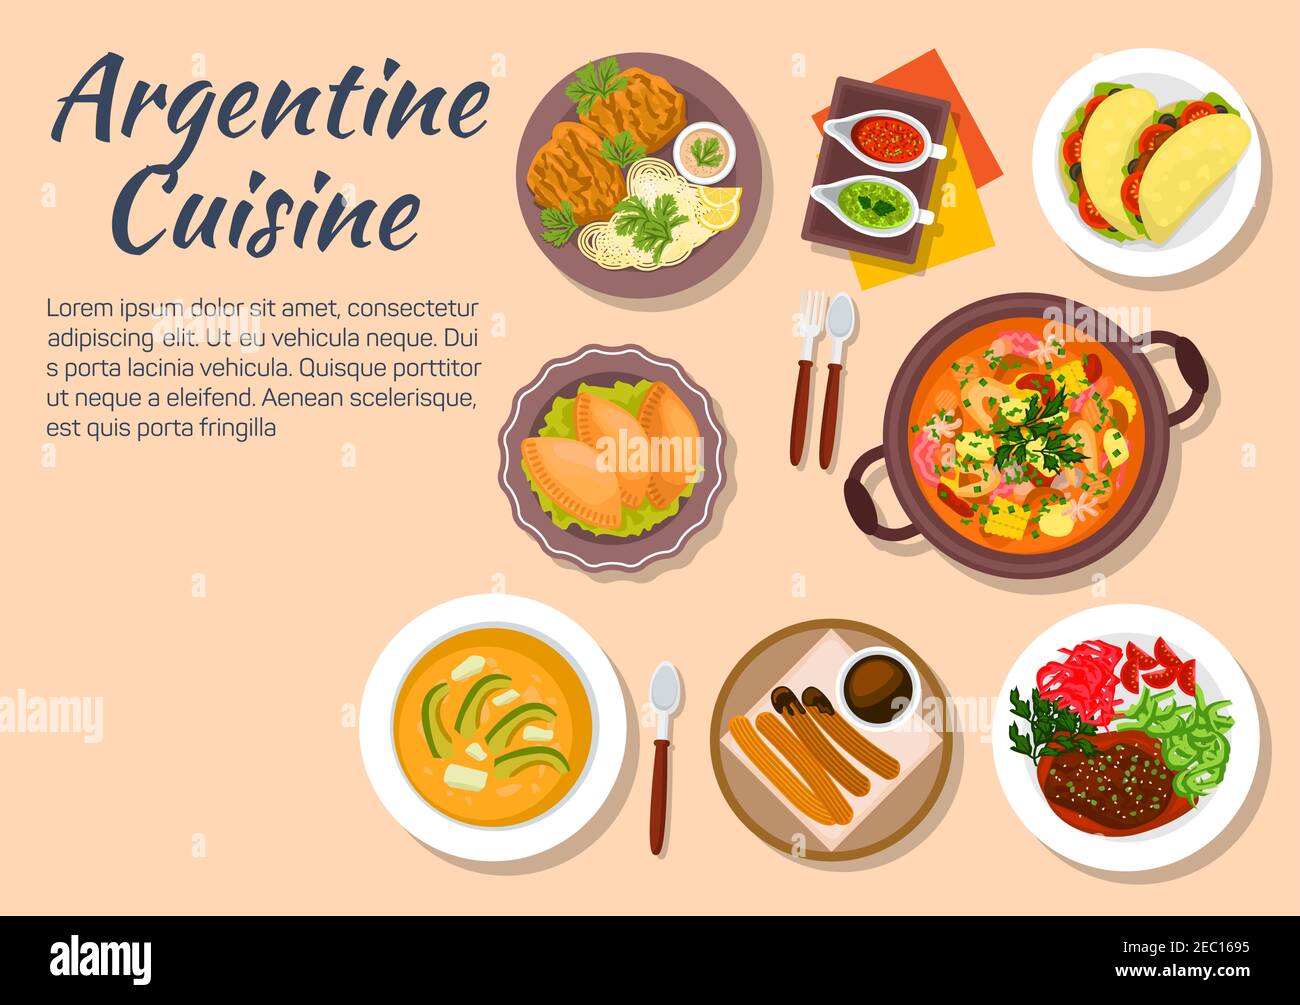 Dinner of argentine cuisine with cazuela and seafood, empanadas and vegetarian tortillas, soup locro with avocado and beef shank ossobuco, pork chop m Stock Vector